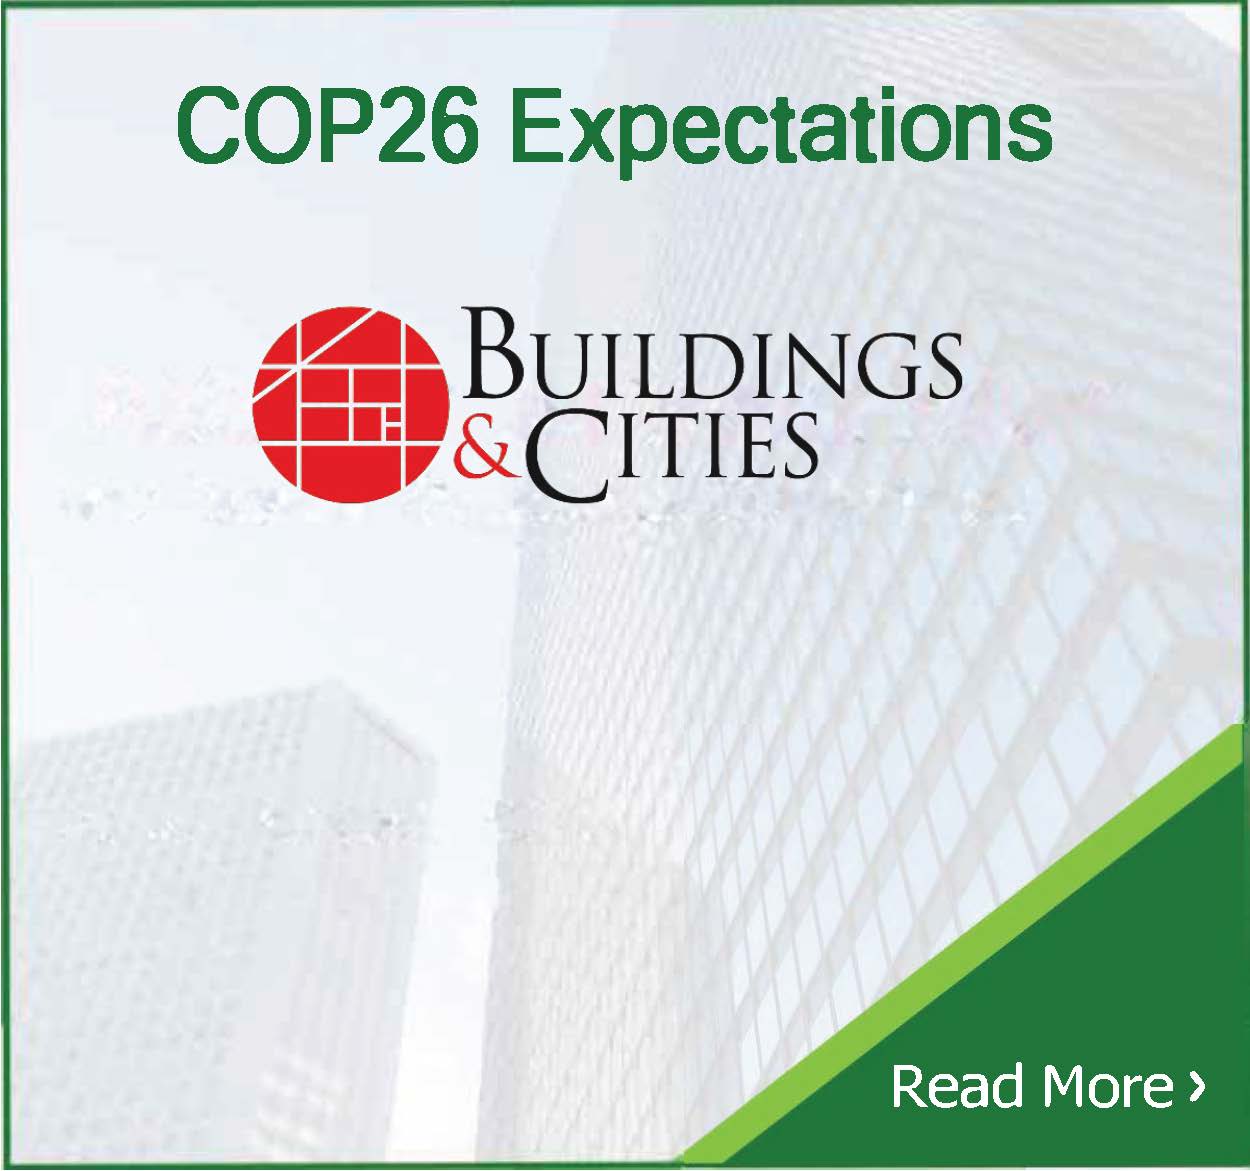 Expectations for COP26: Buildings & Cities